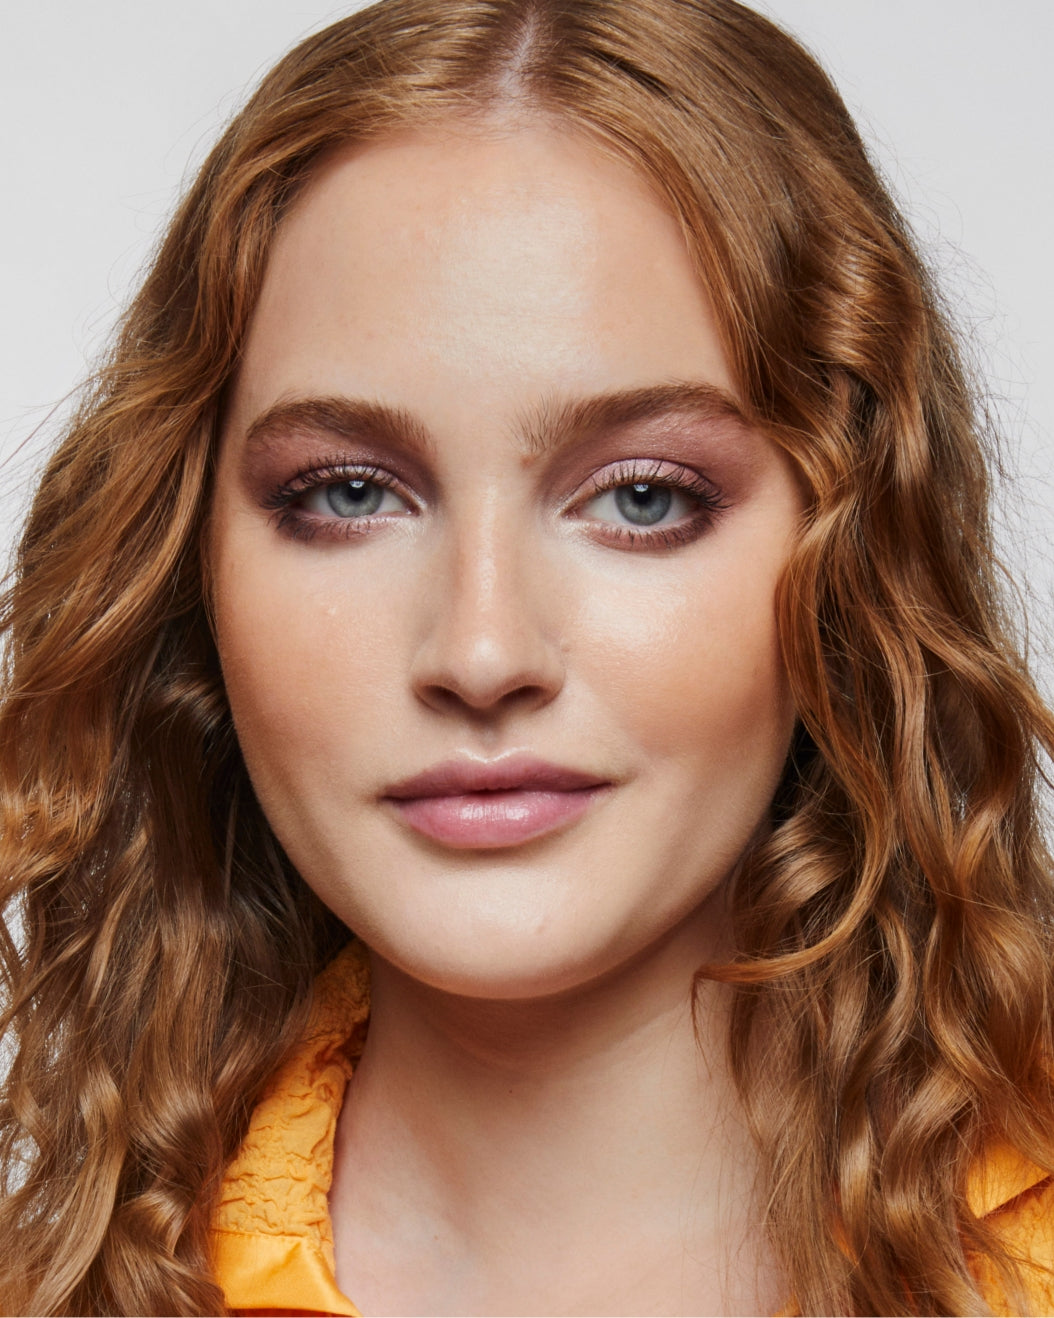 Model wears a full face of Milk Makeup products including Matte Bronzer and Lip + Cheek against a white background